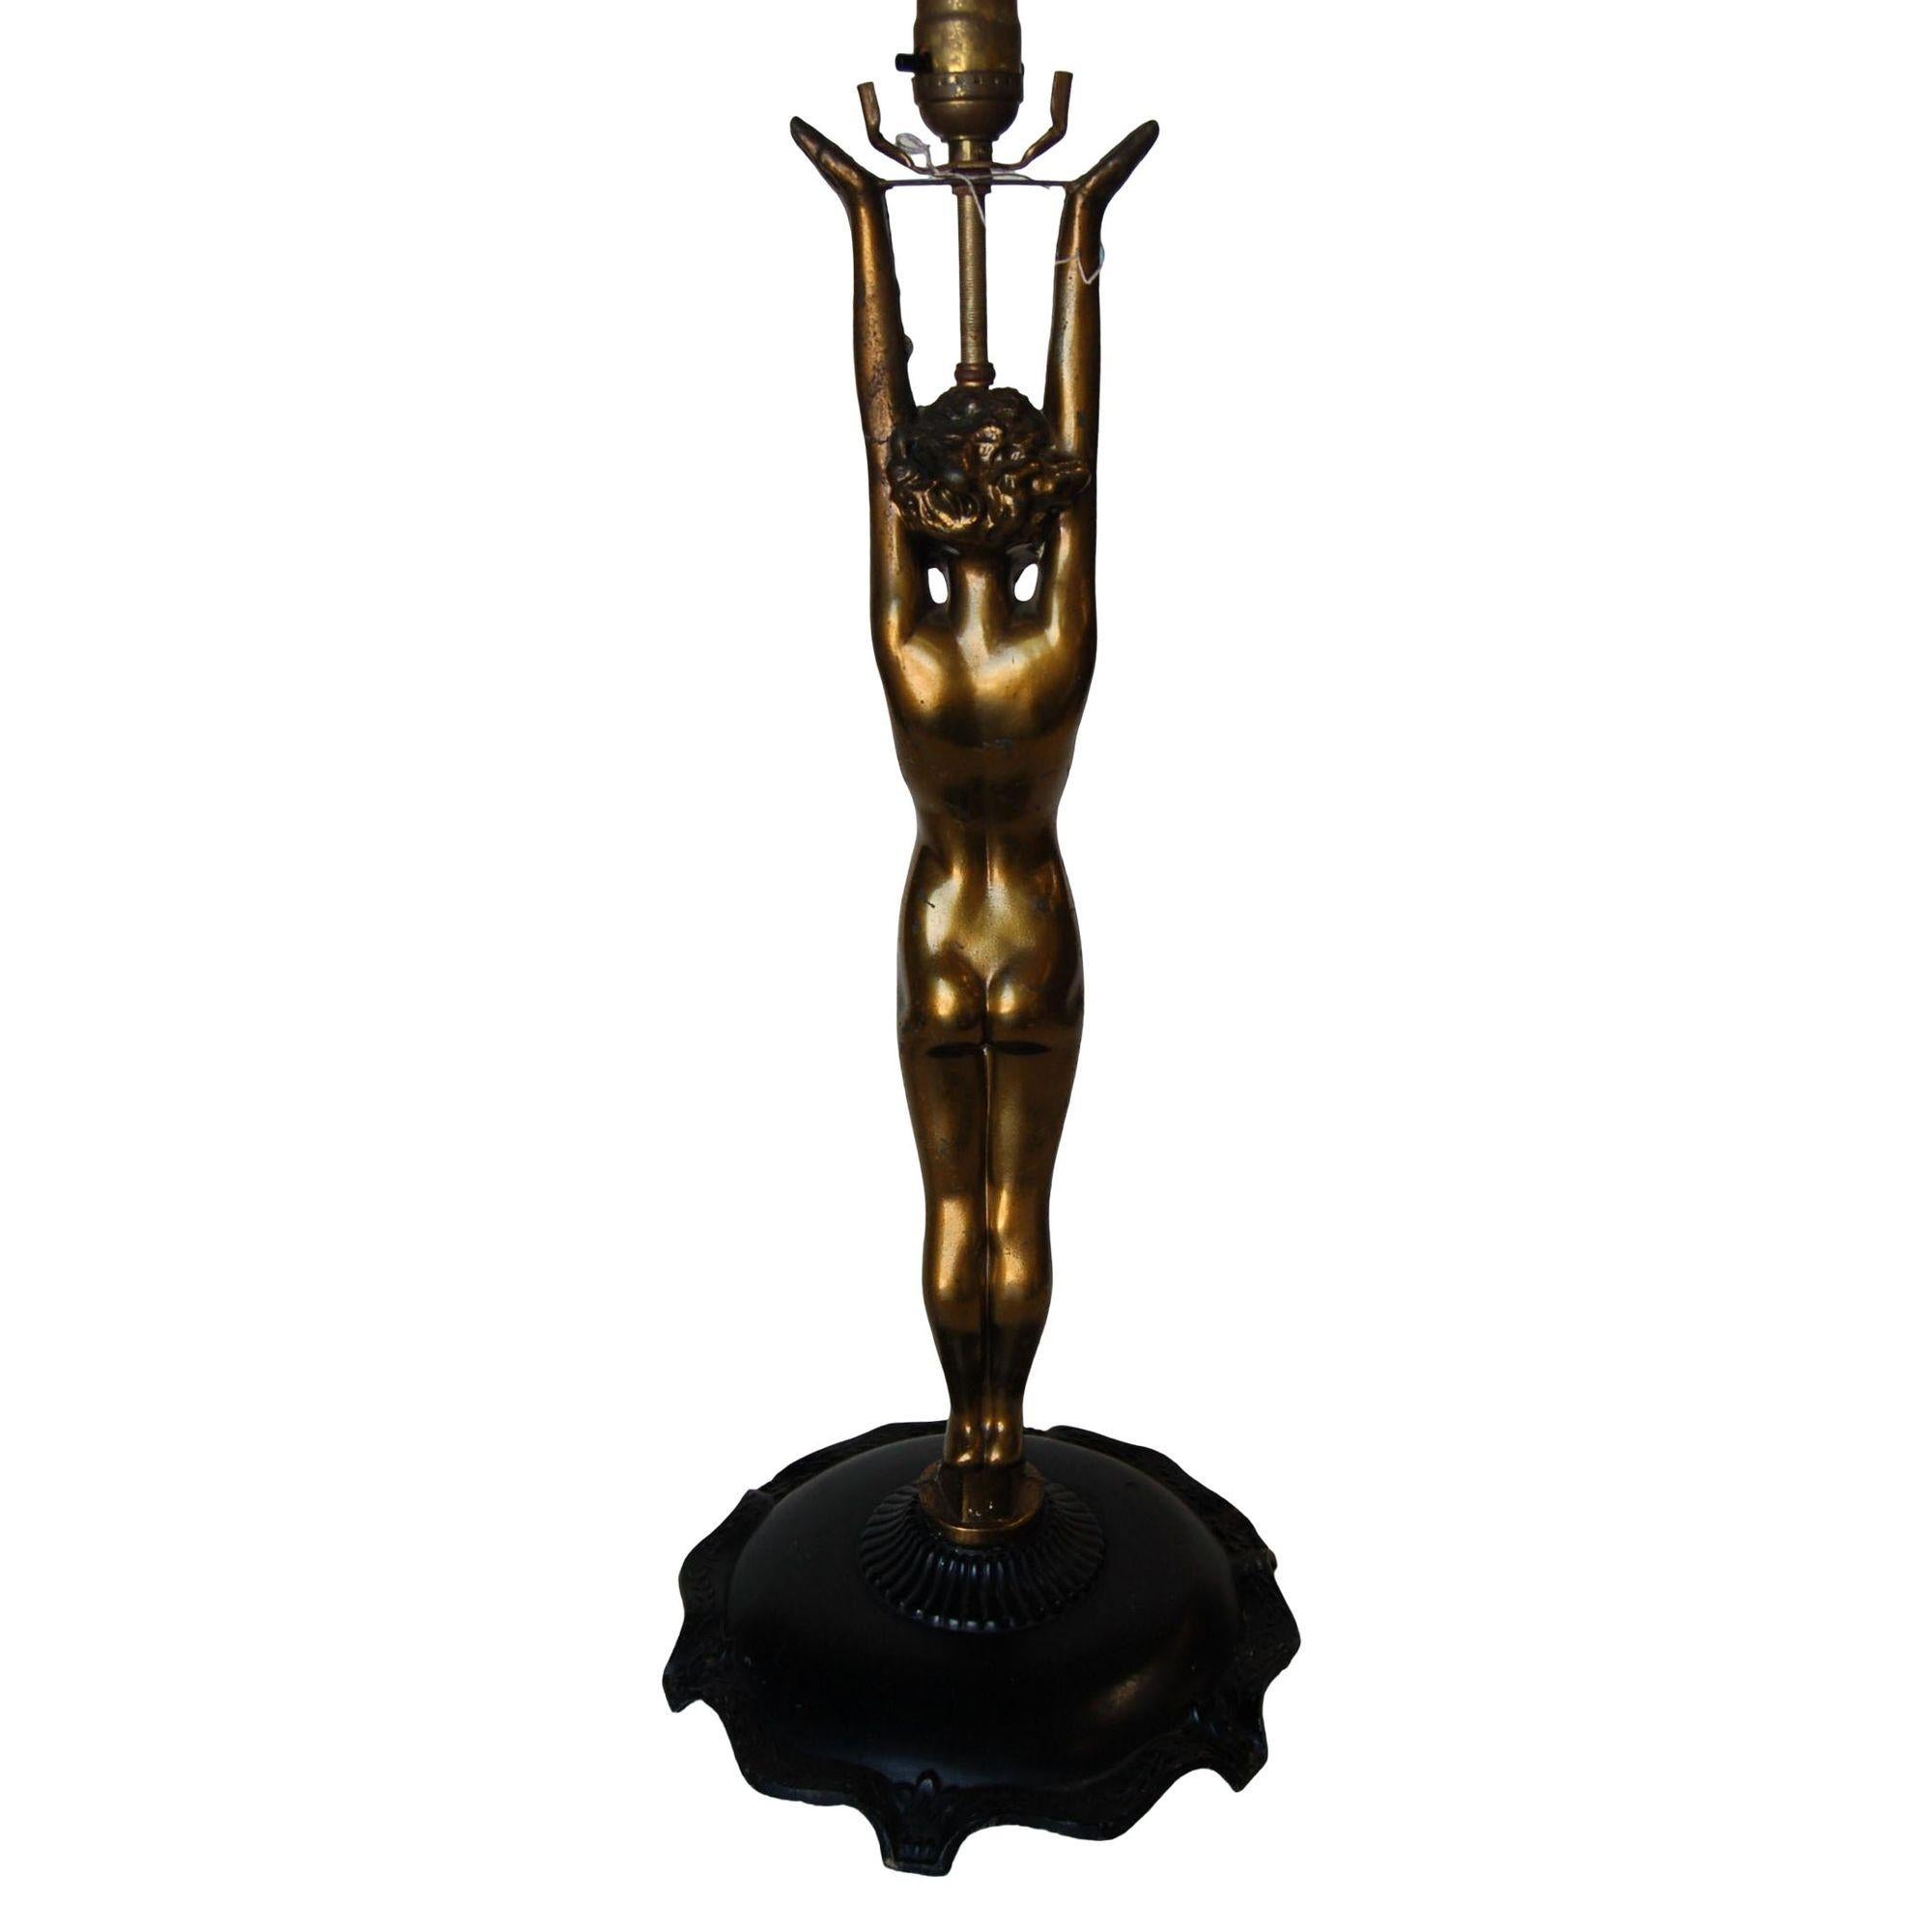 Beautiful Nuart standing nude bronze figure accent table lamp with outstretched arms on an ornate black metal base. 

Measures: 11